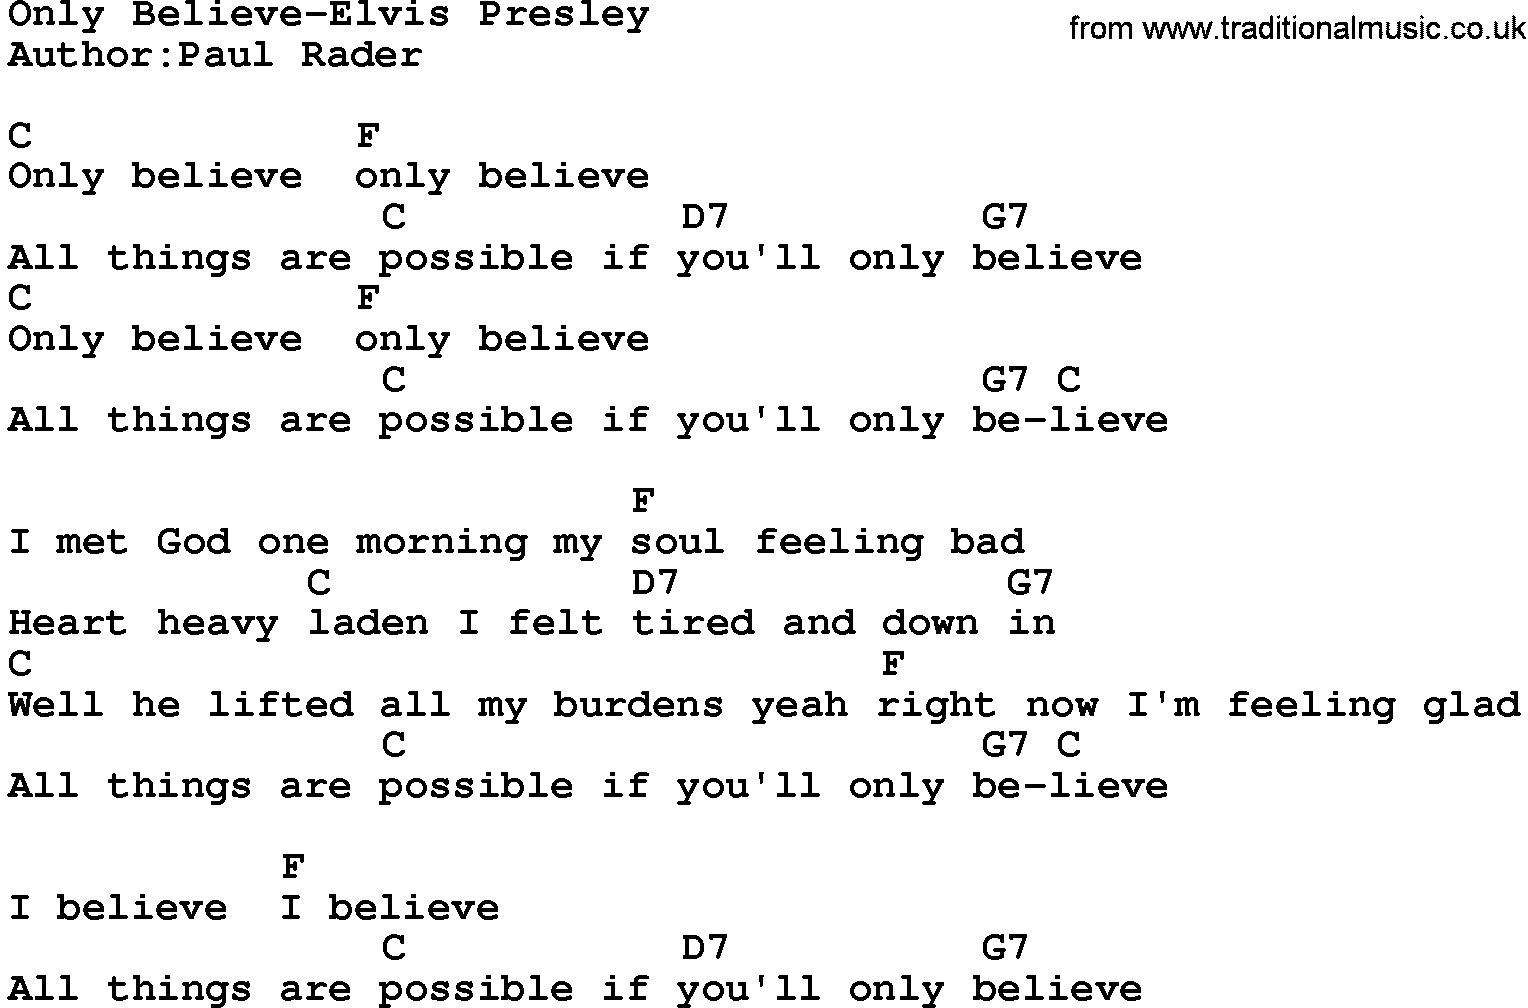 Country music song: Only Believe-Elvis Presley lyrics and chords